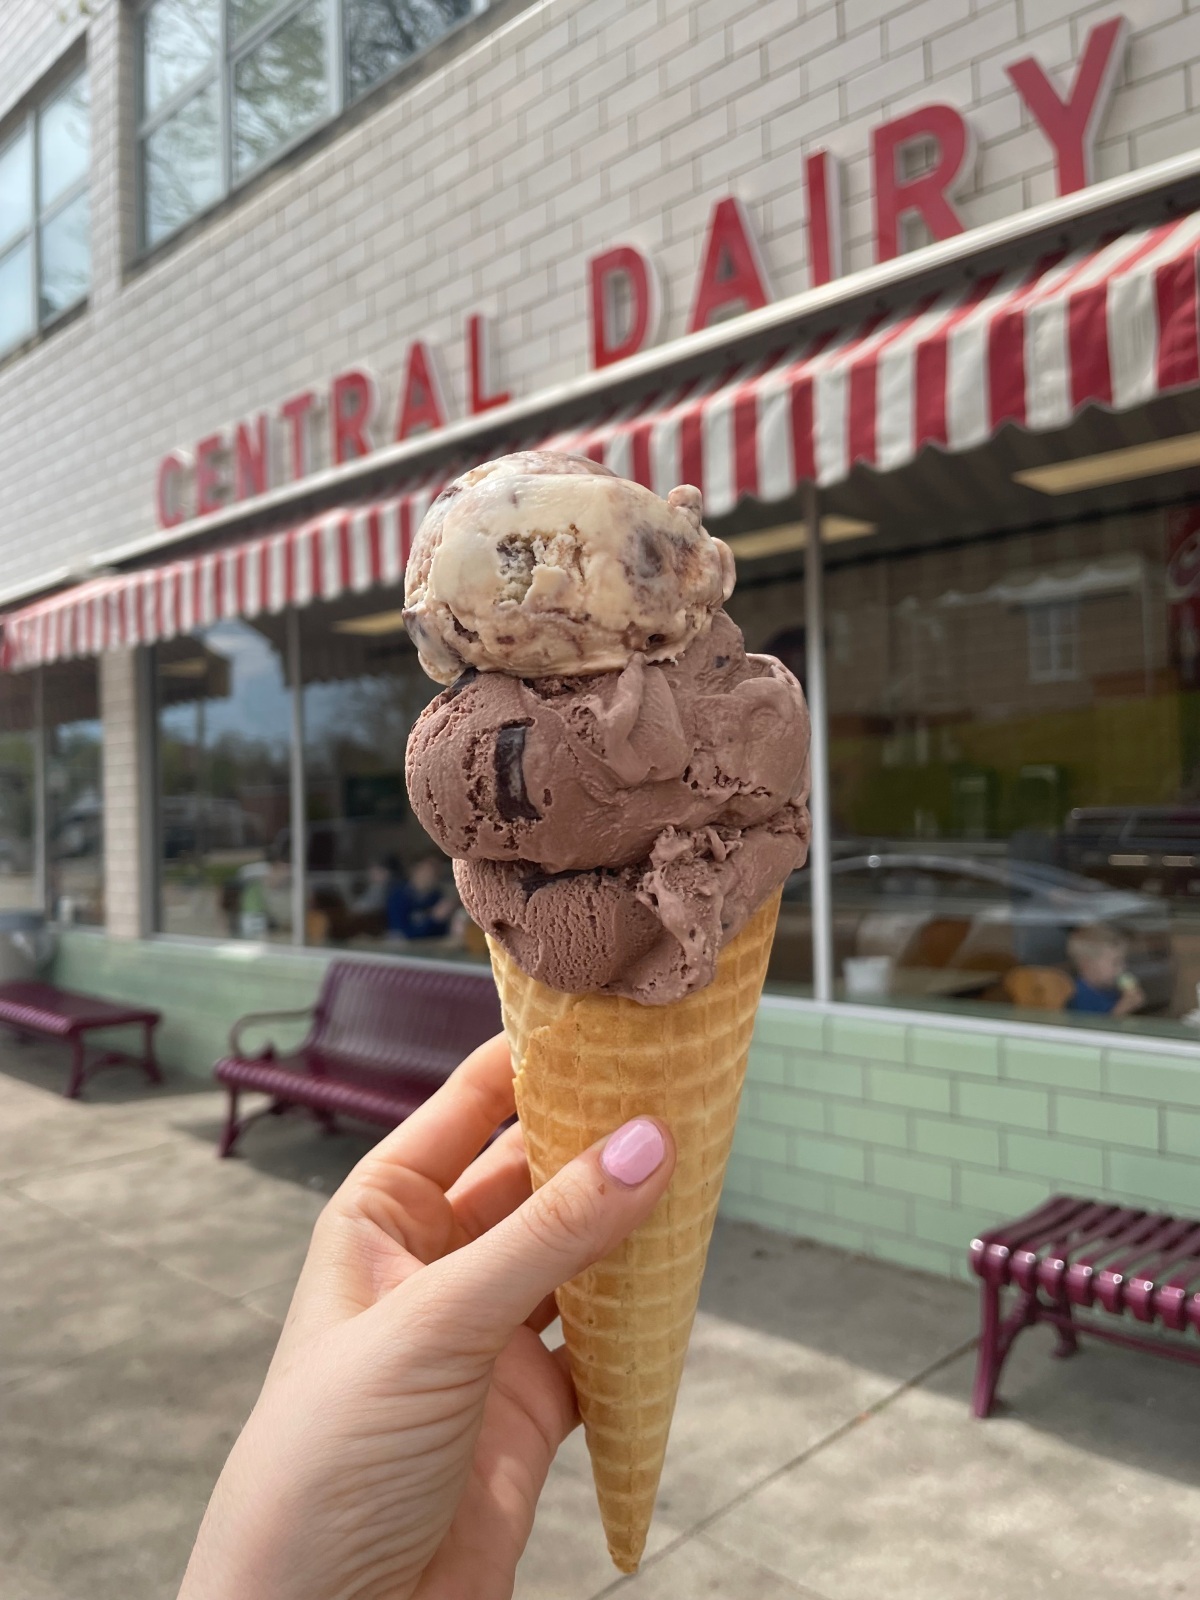 Central Dairy – Jefferson City, MO